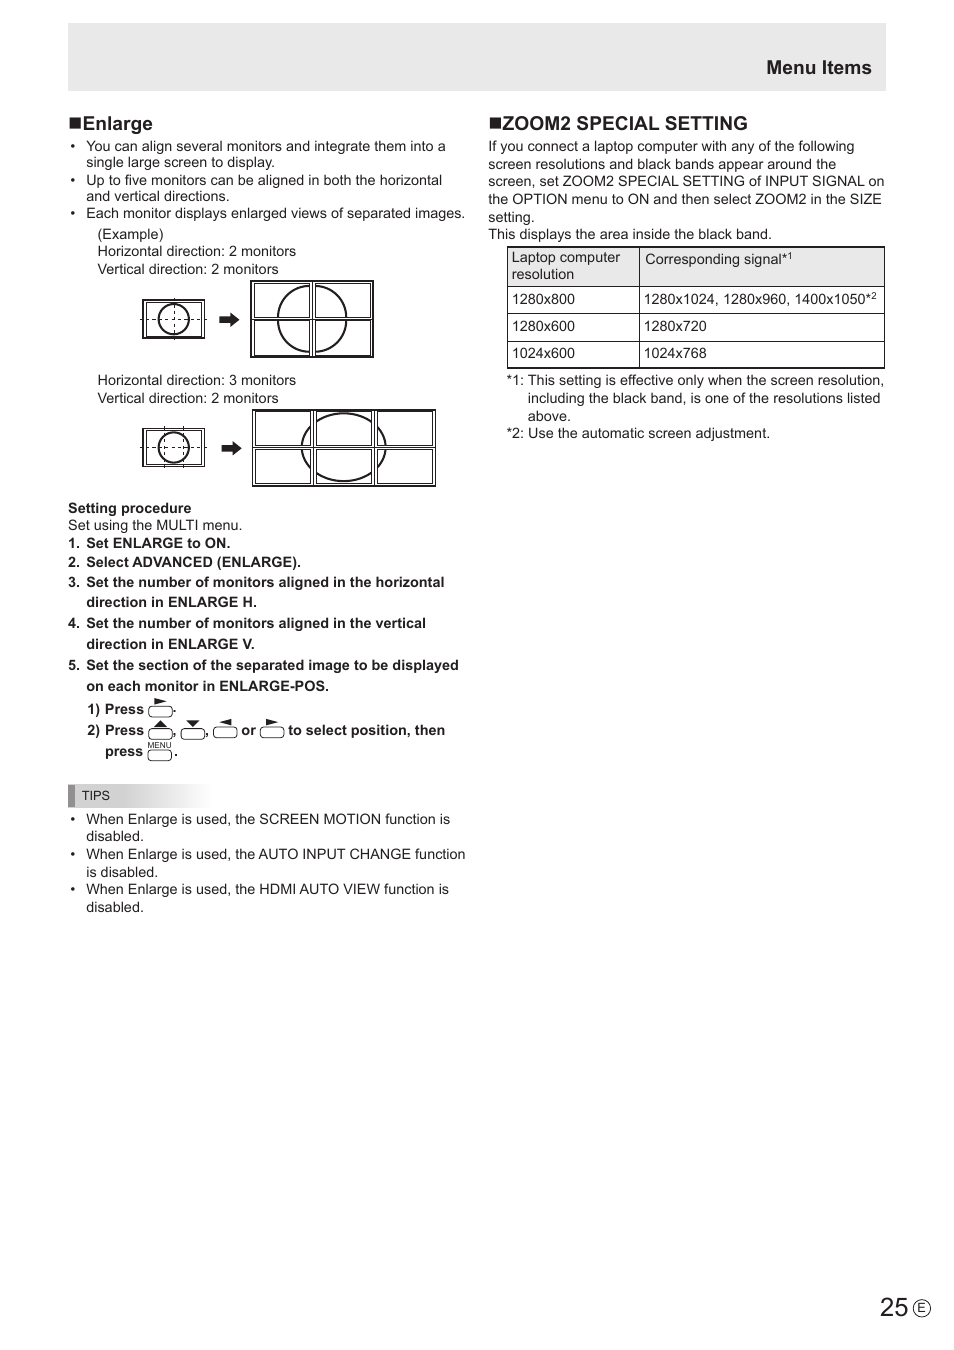 Nenlarge, Menu items n zoom2 special setting | Sharp PN-E802 User Manual | Page 25 / 56